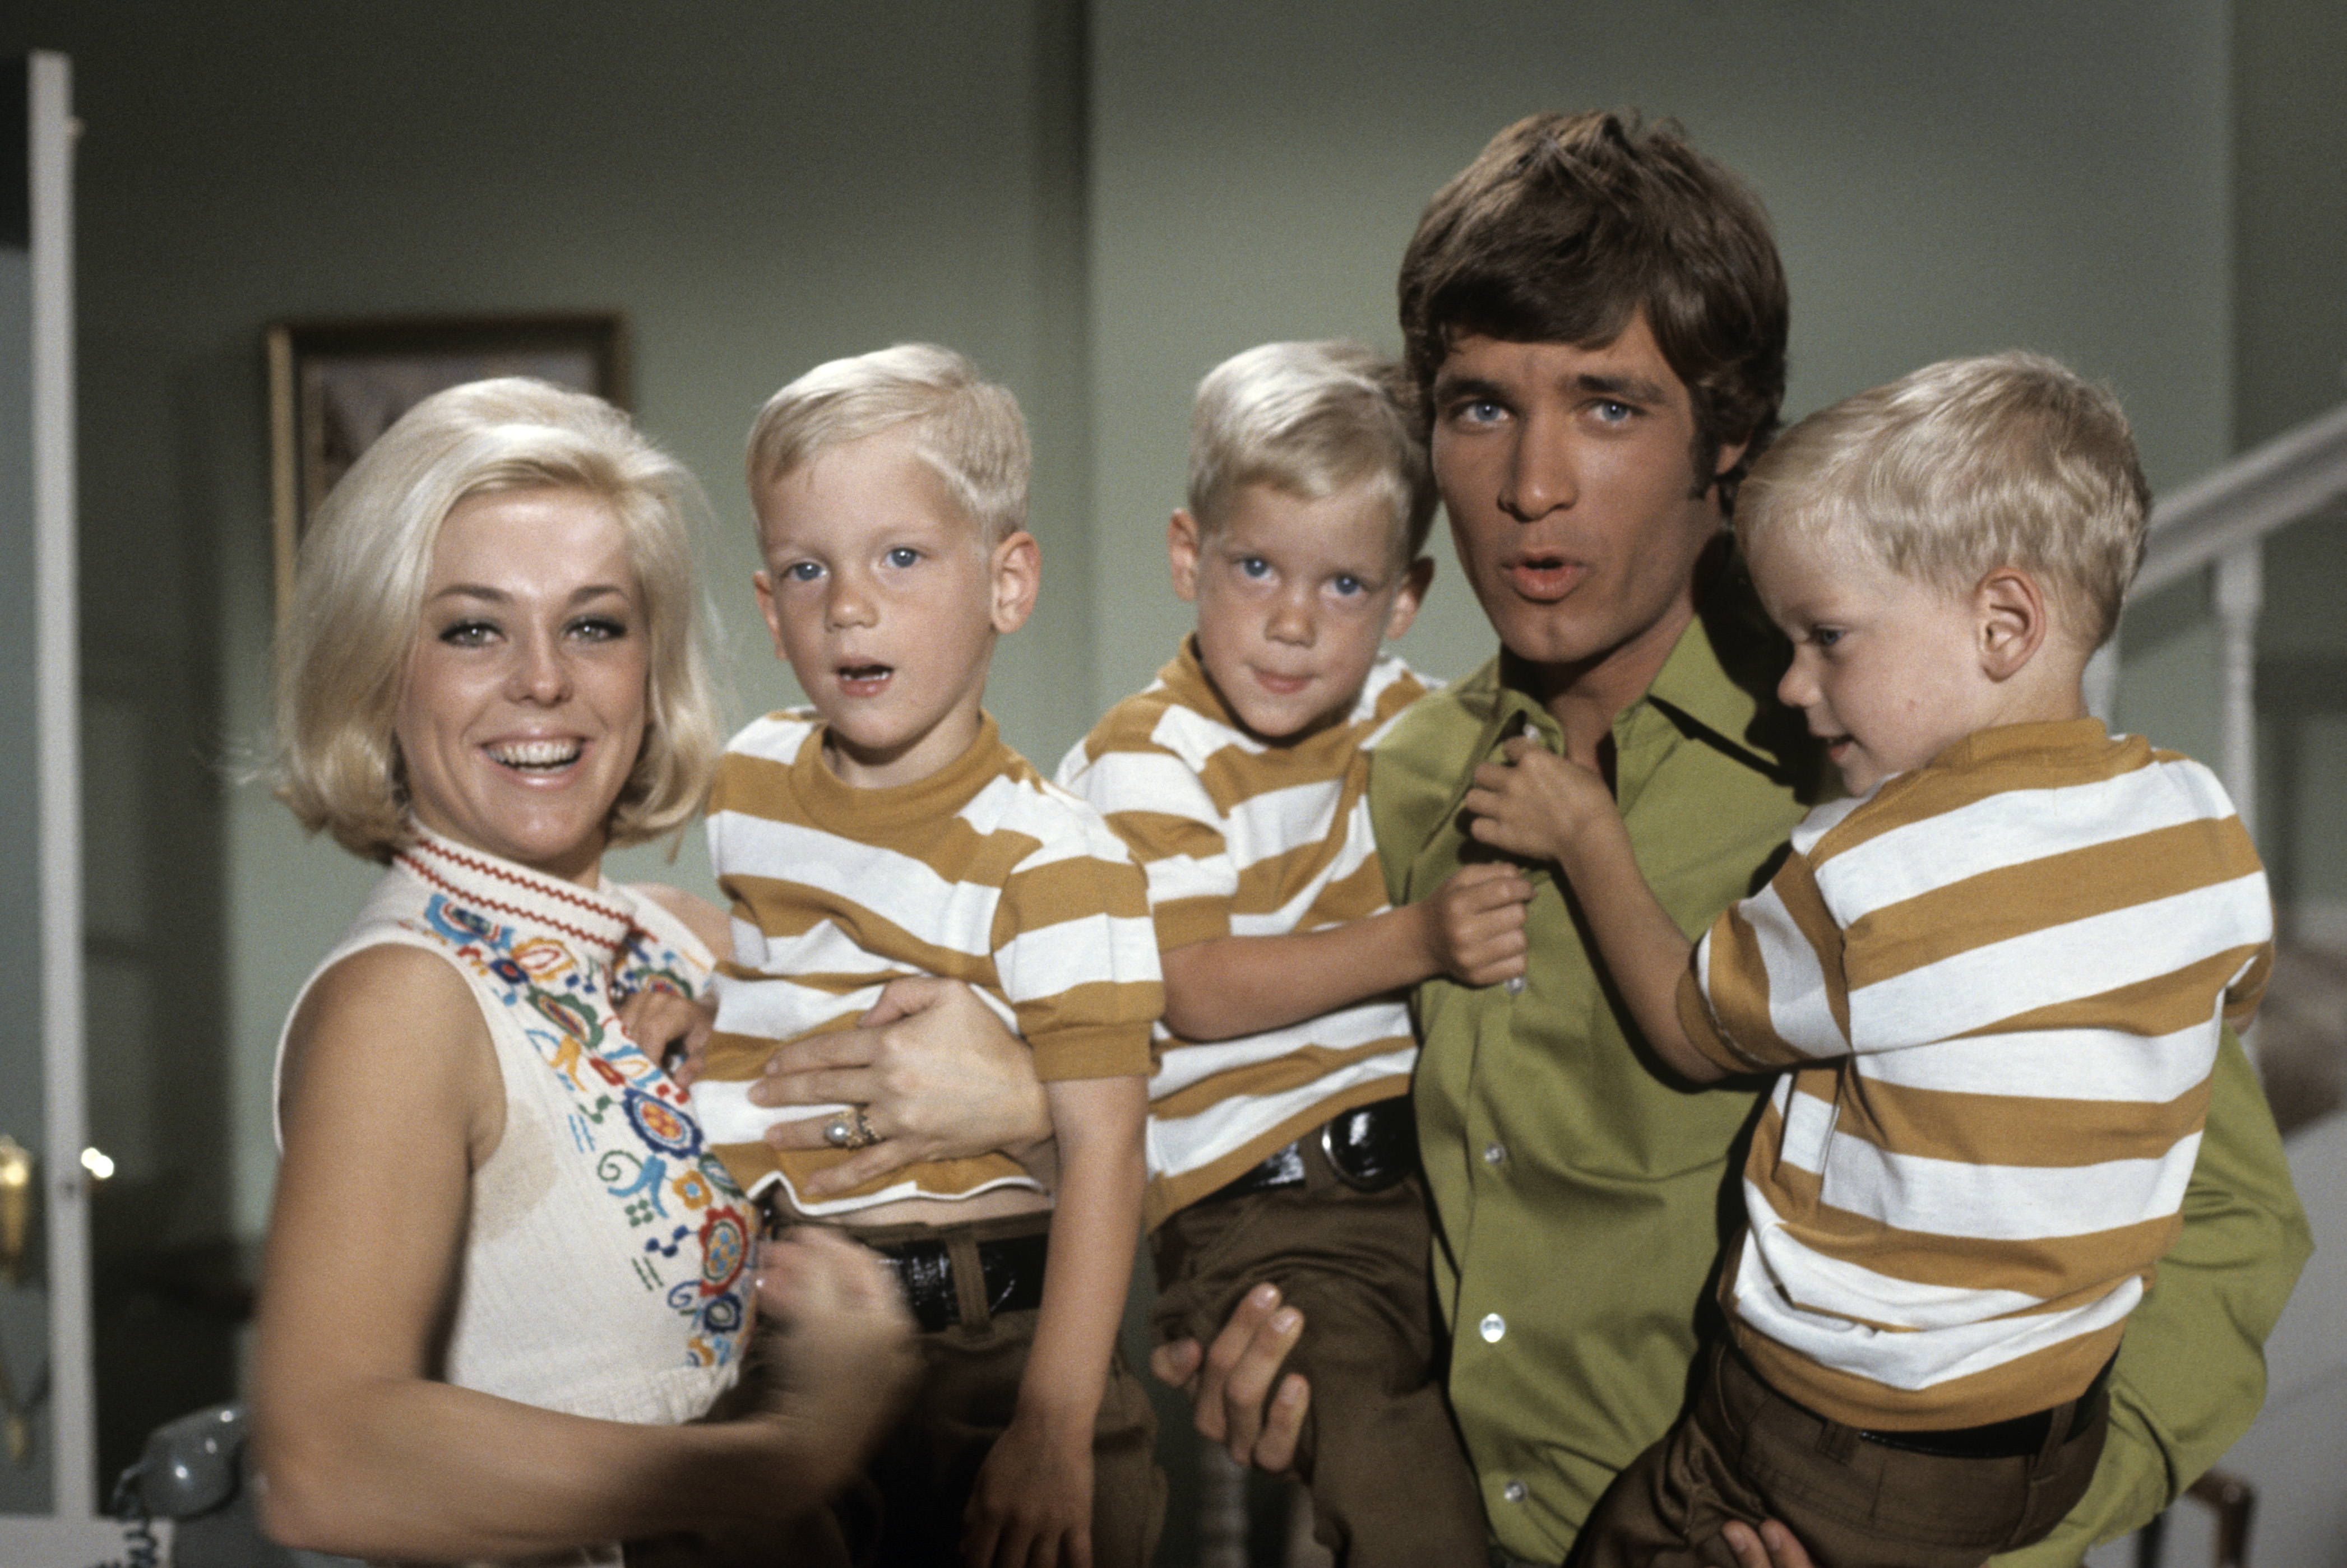 Tina Cole, Extras, Don Grady on "My Three Sons" circa 1960-1972 | Source: Getty Images